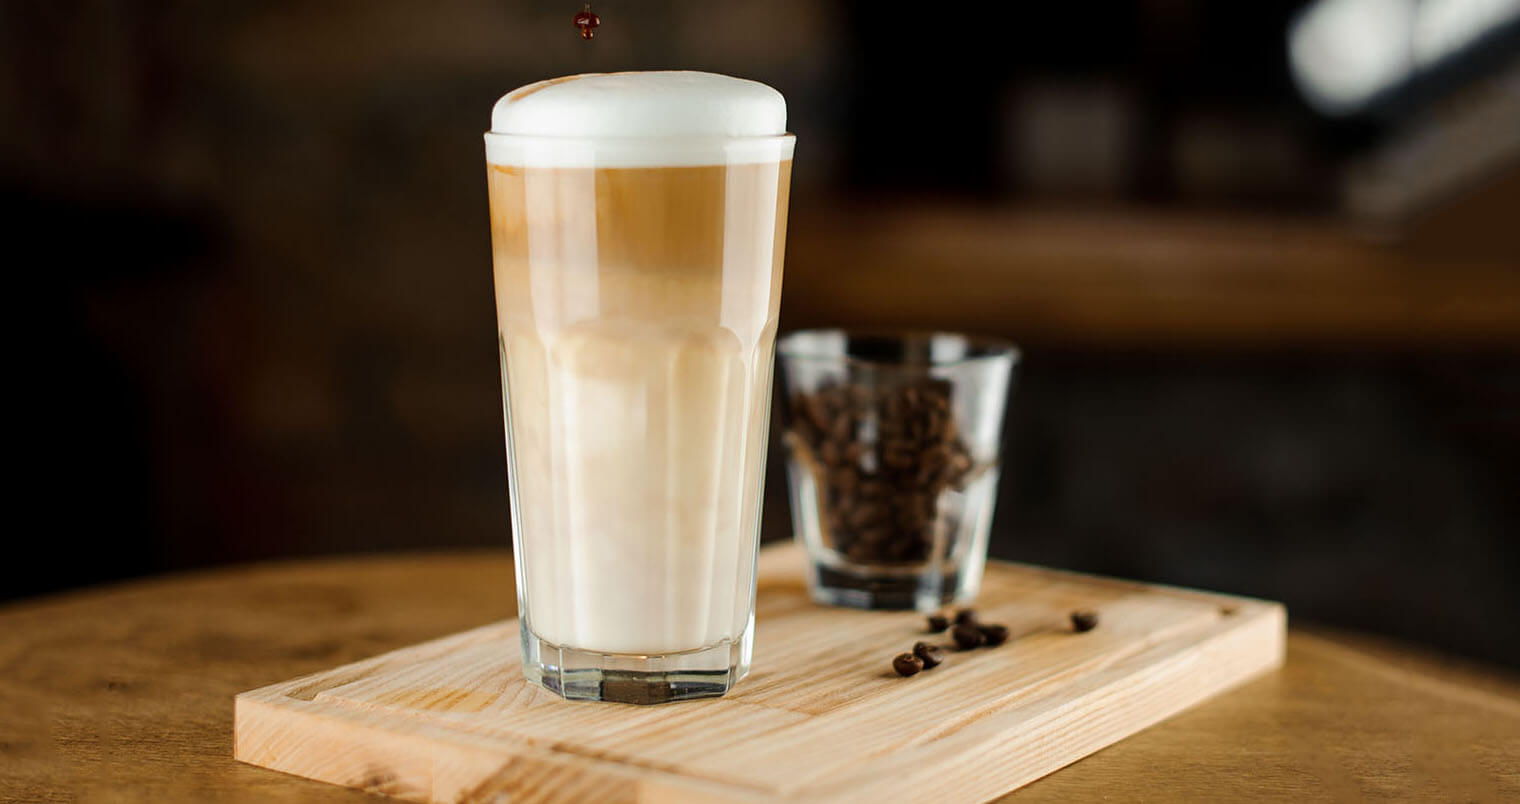 Hot coffee latte in a high glass glass on a wooden board. Glass of coffee beans in the background